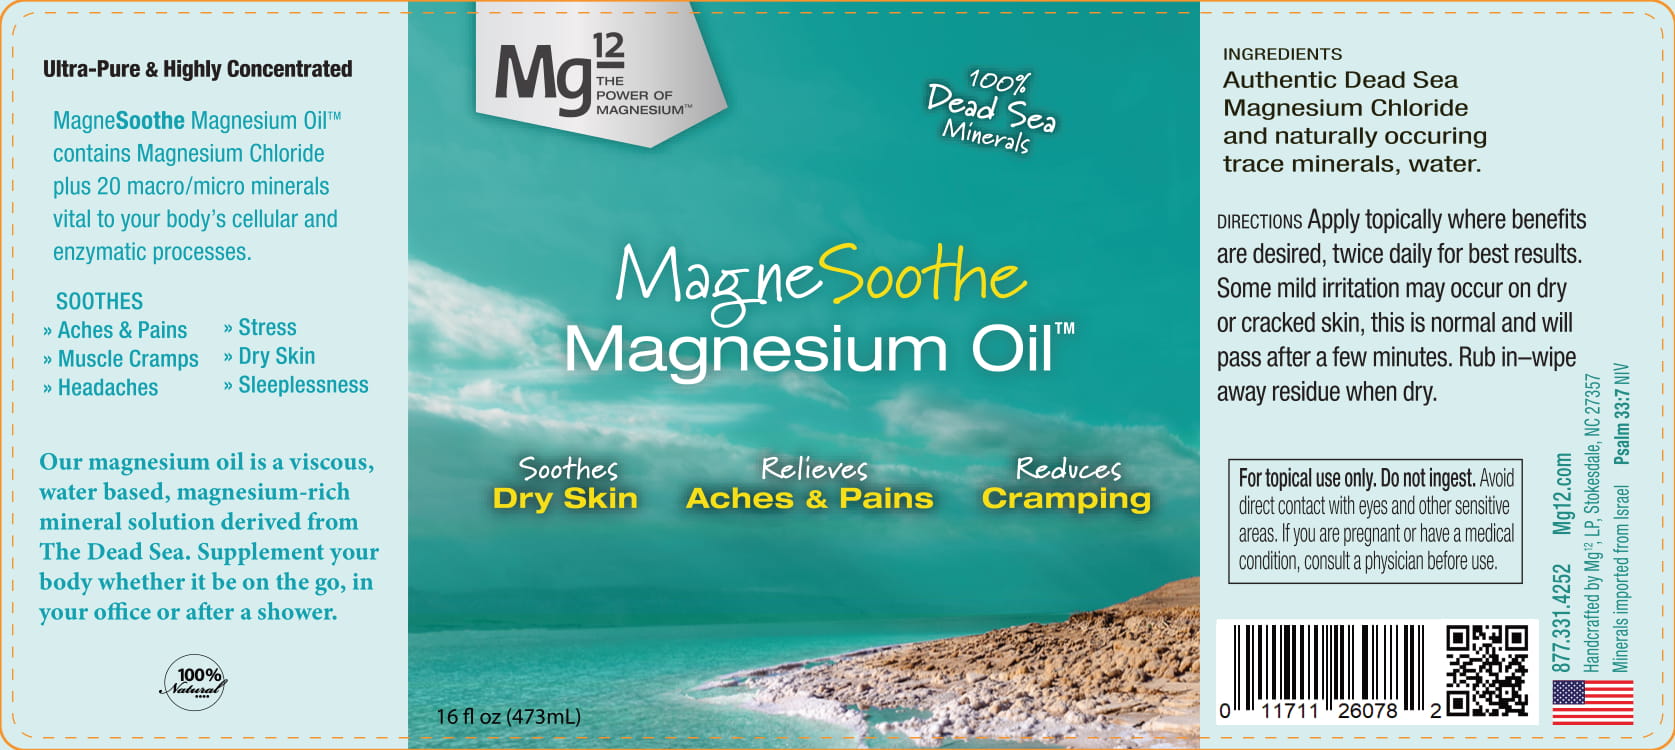 Magnesoothe Oil Label